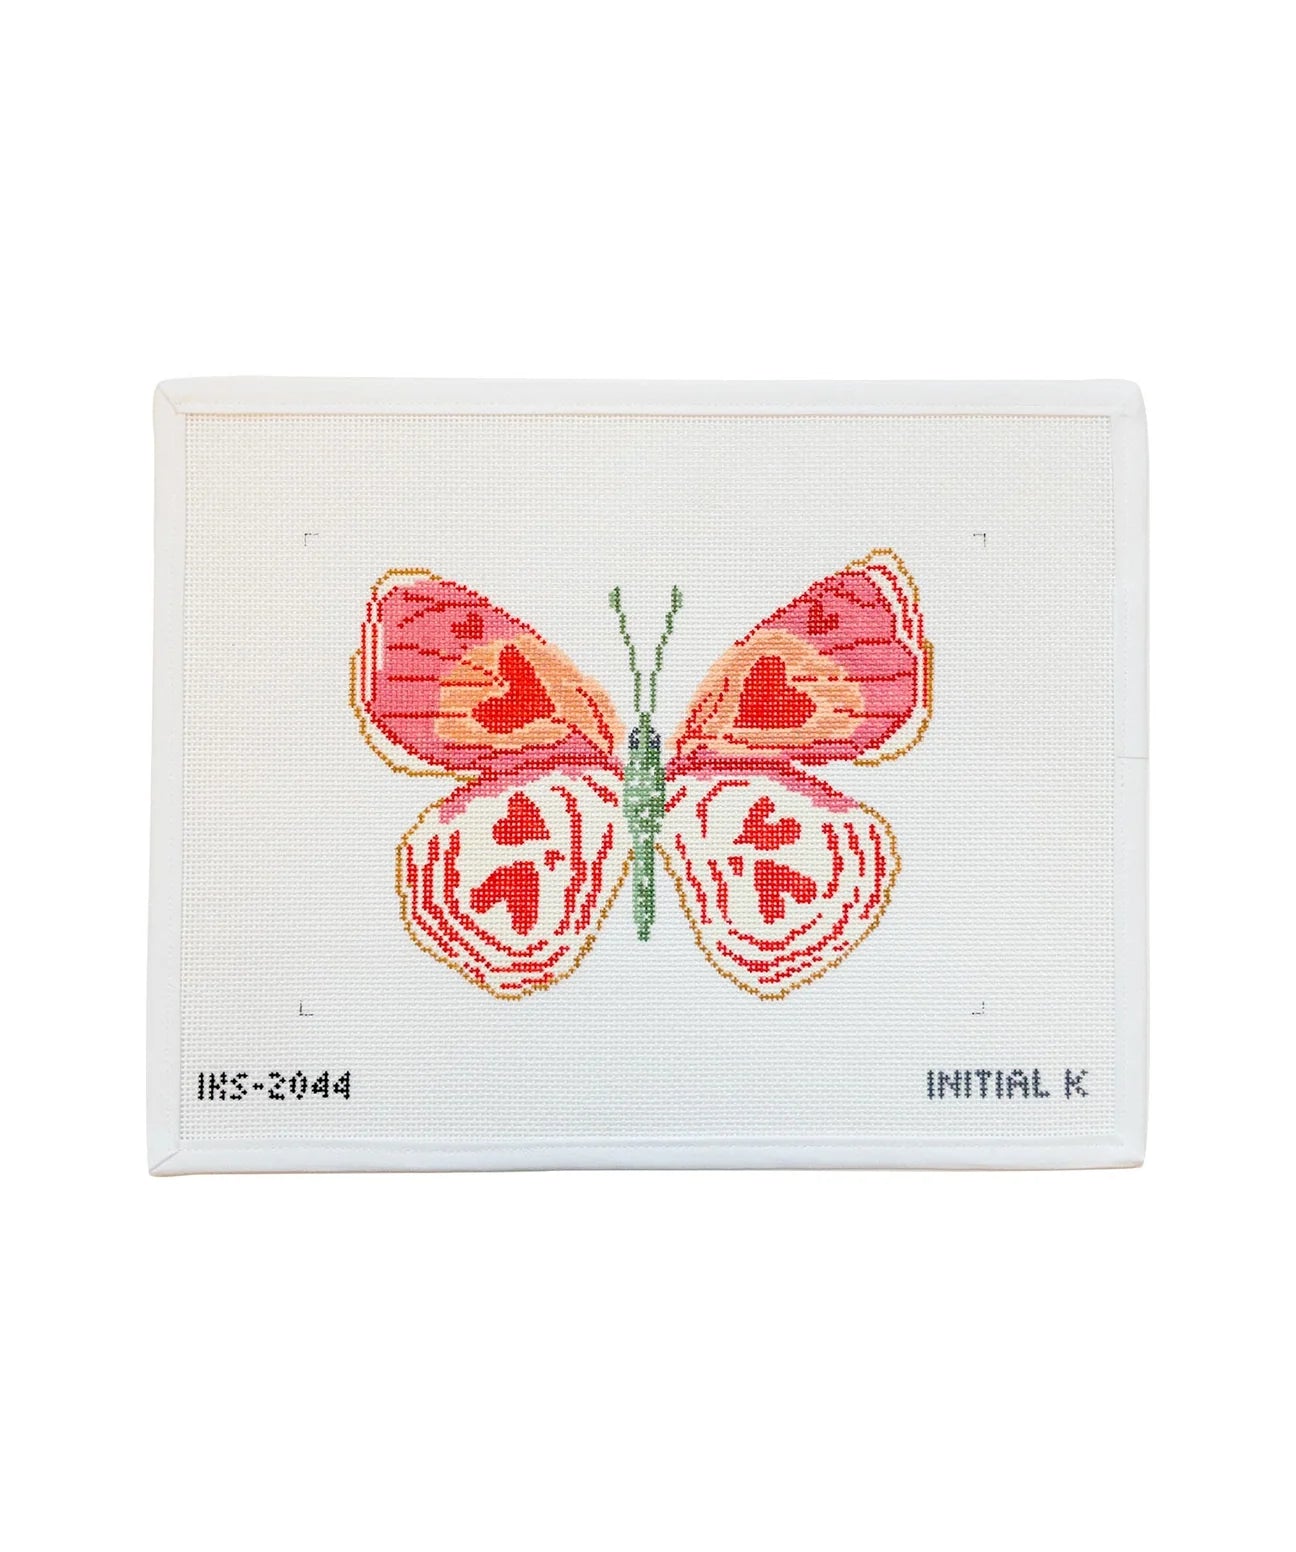 Butterfly - Pinks and Orange IKS 2043